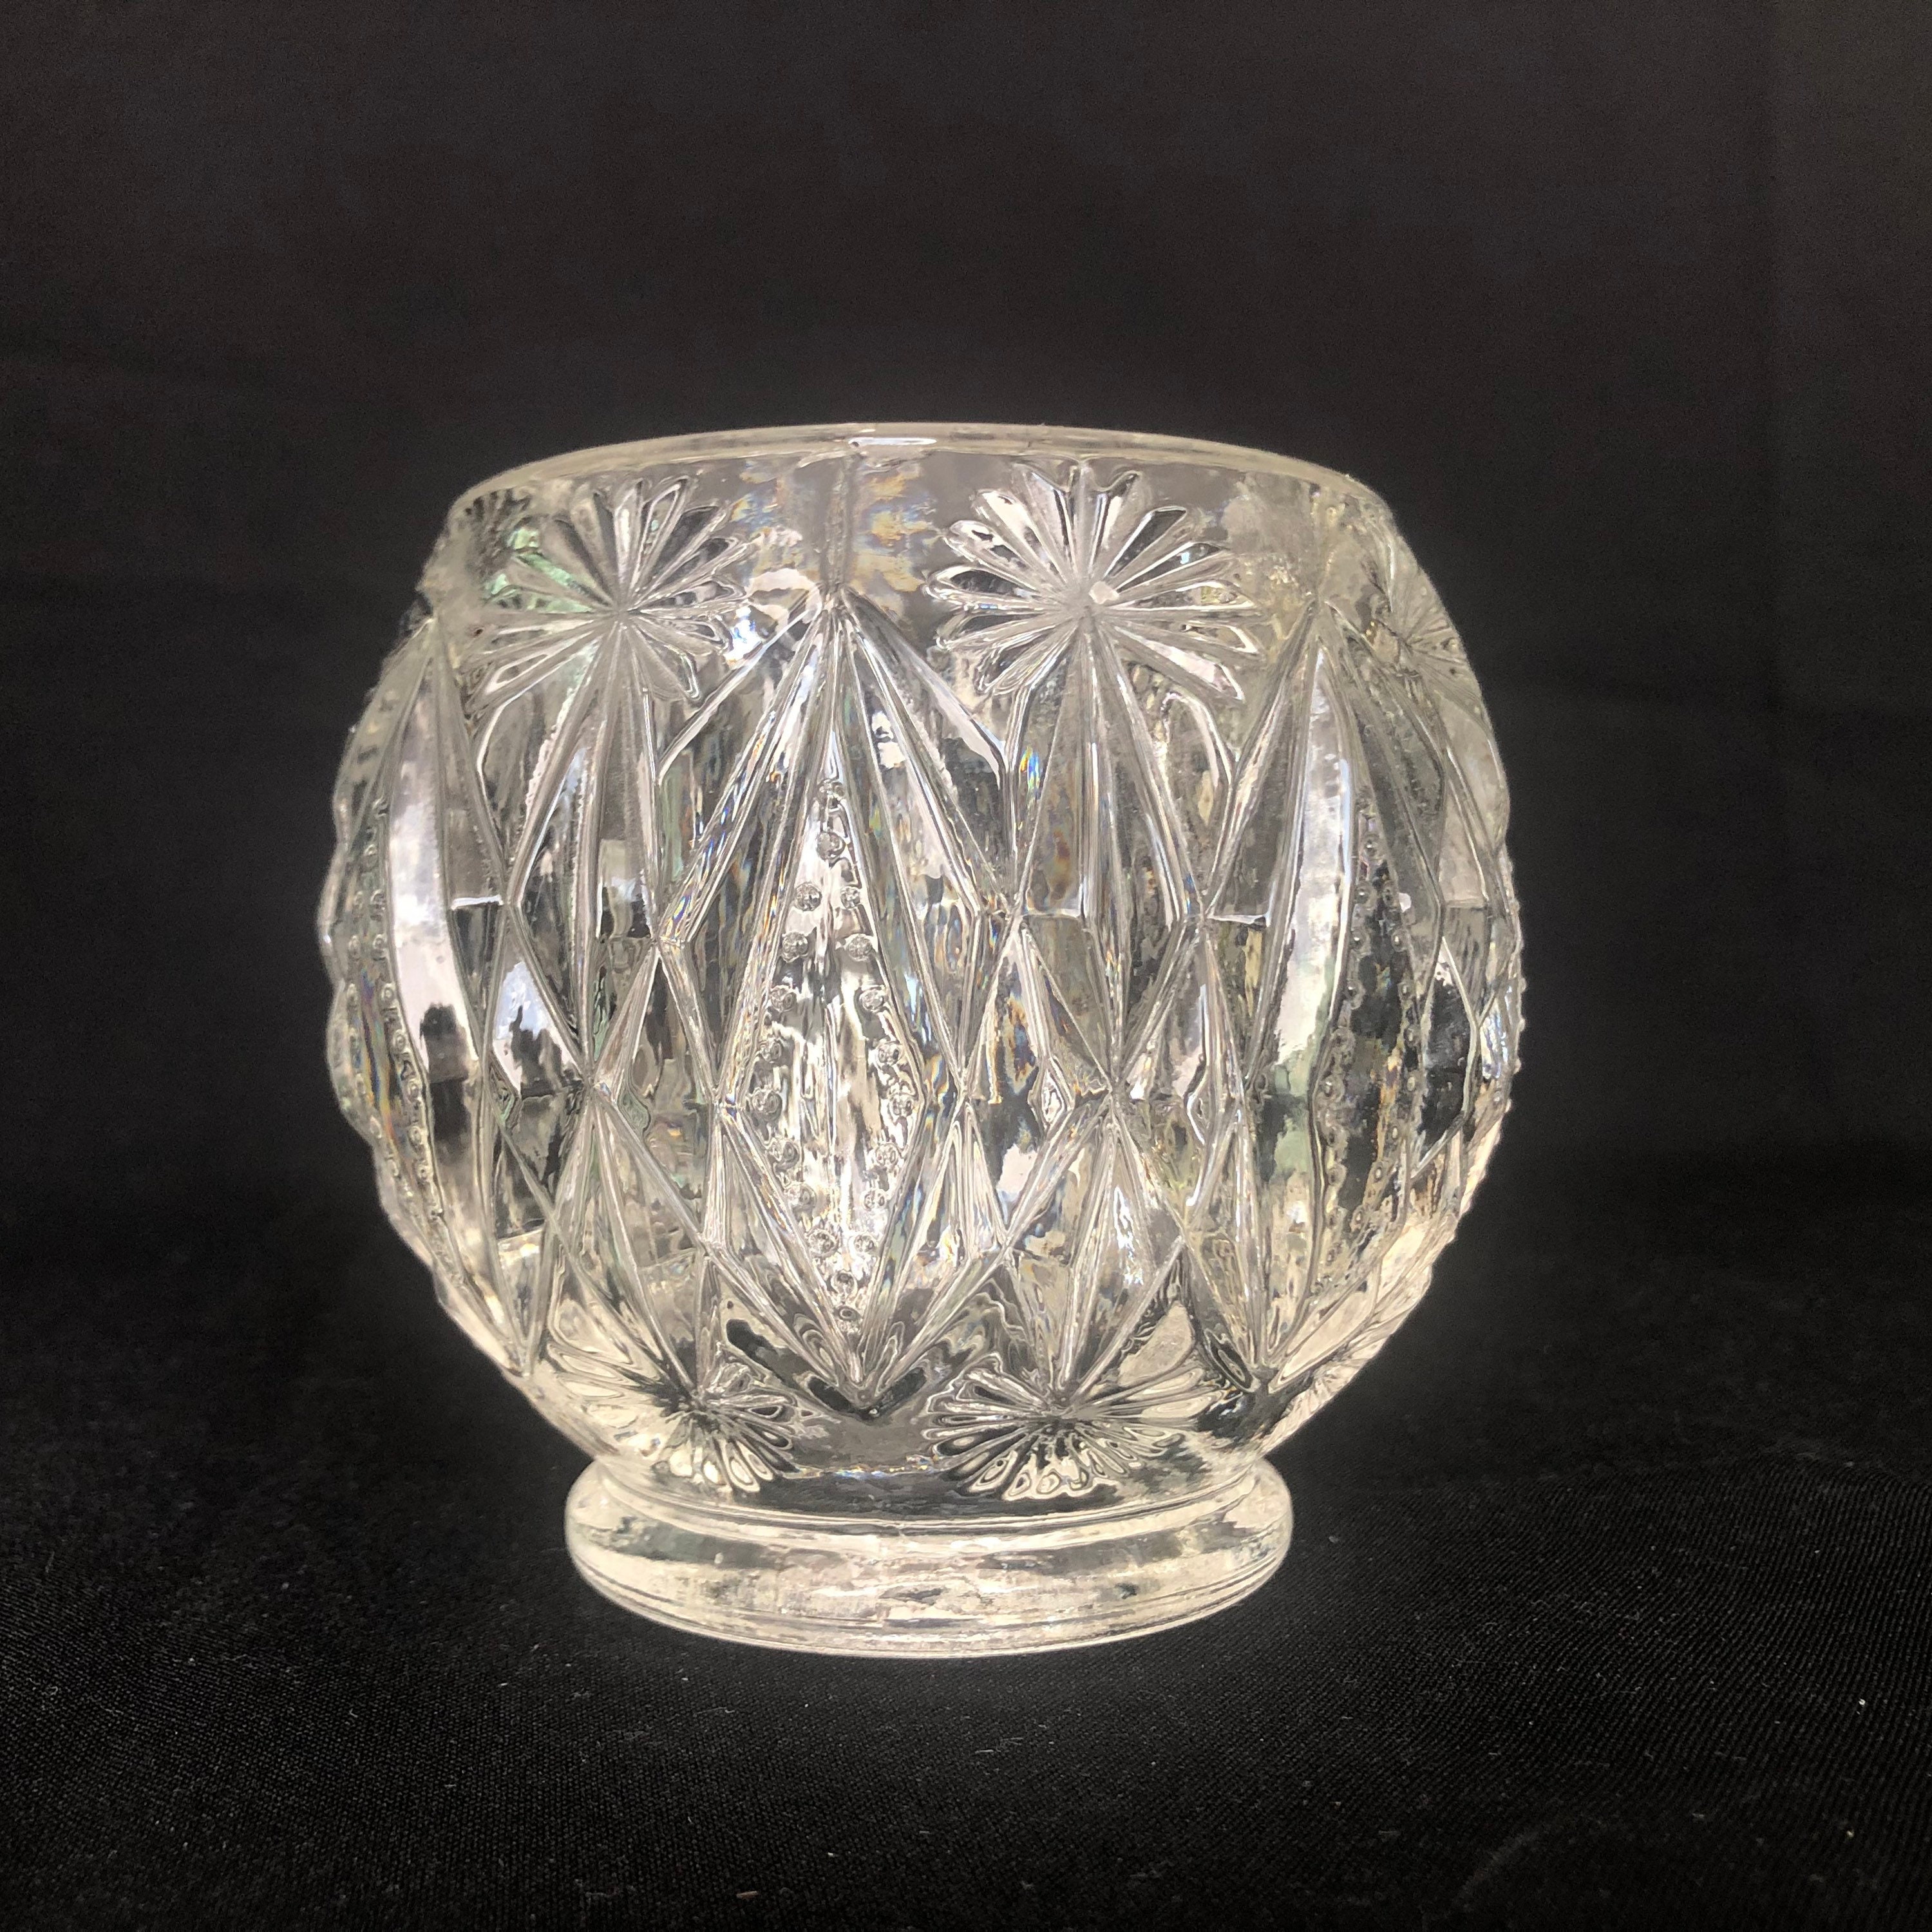 Achat OBJET DECO CRISTAL BOMBE occasion - Herent